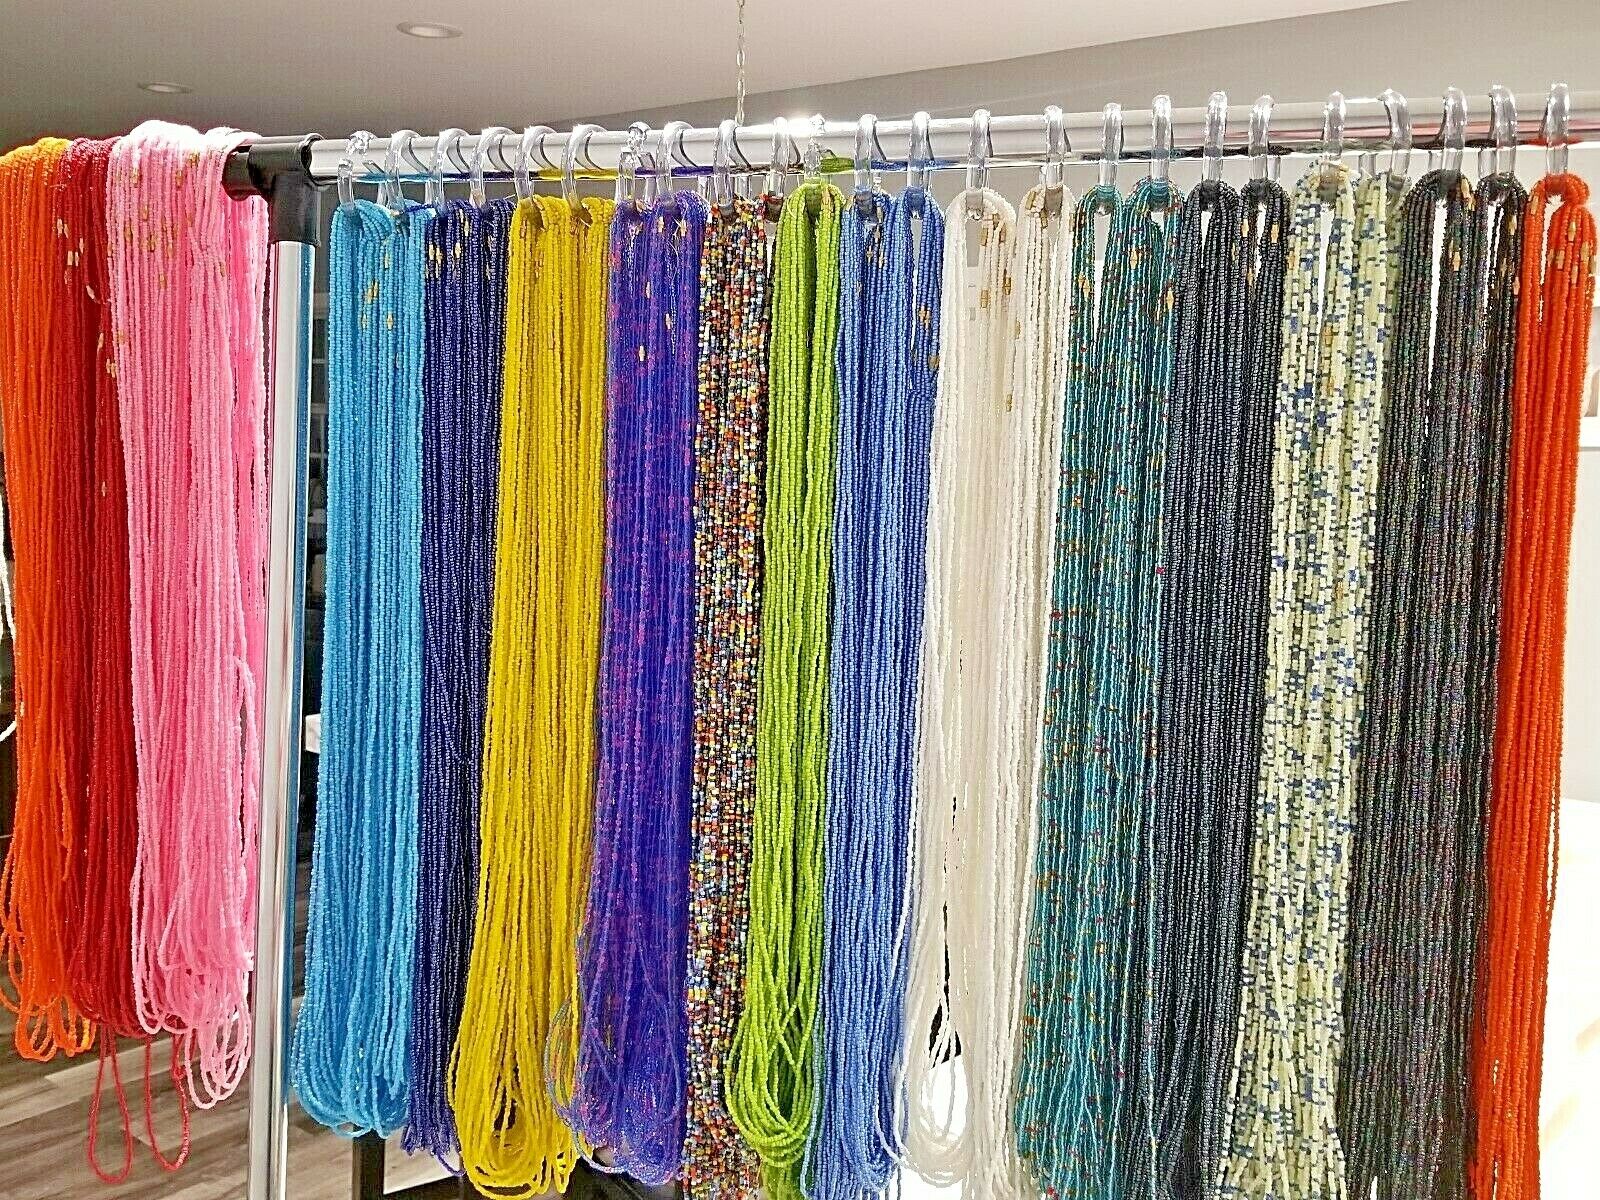 New  Beautiful Multi-colored Waist Beads 0-50 Inches  All Colors Avaliable!!!